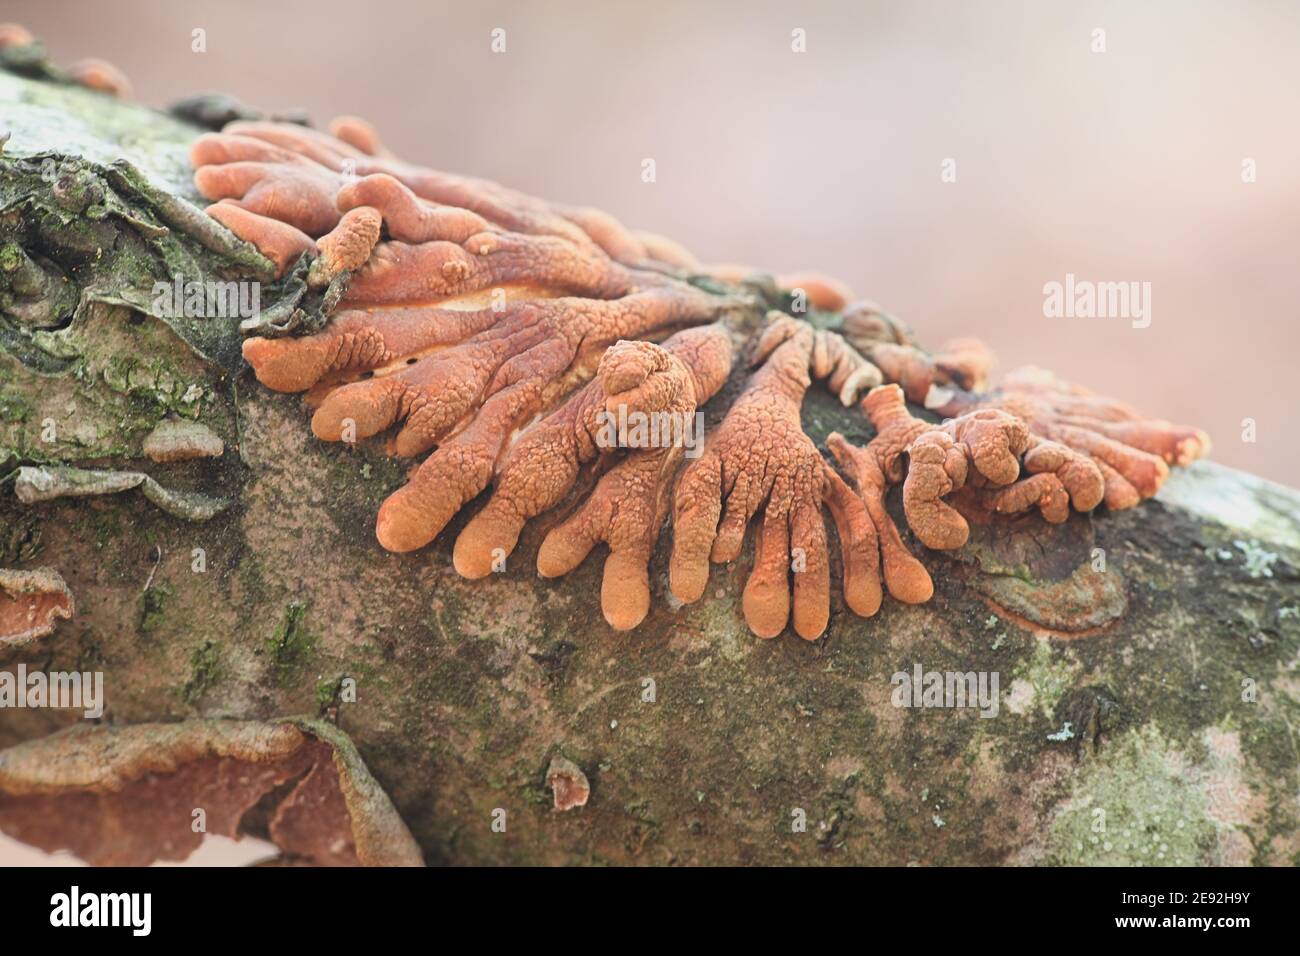 Hypocreopsis lichenoides, also called Hypocrea riccioidea, commonly known as Willow Gloves, wild mushroom from Finland Stock Photo